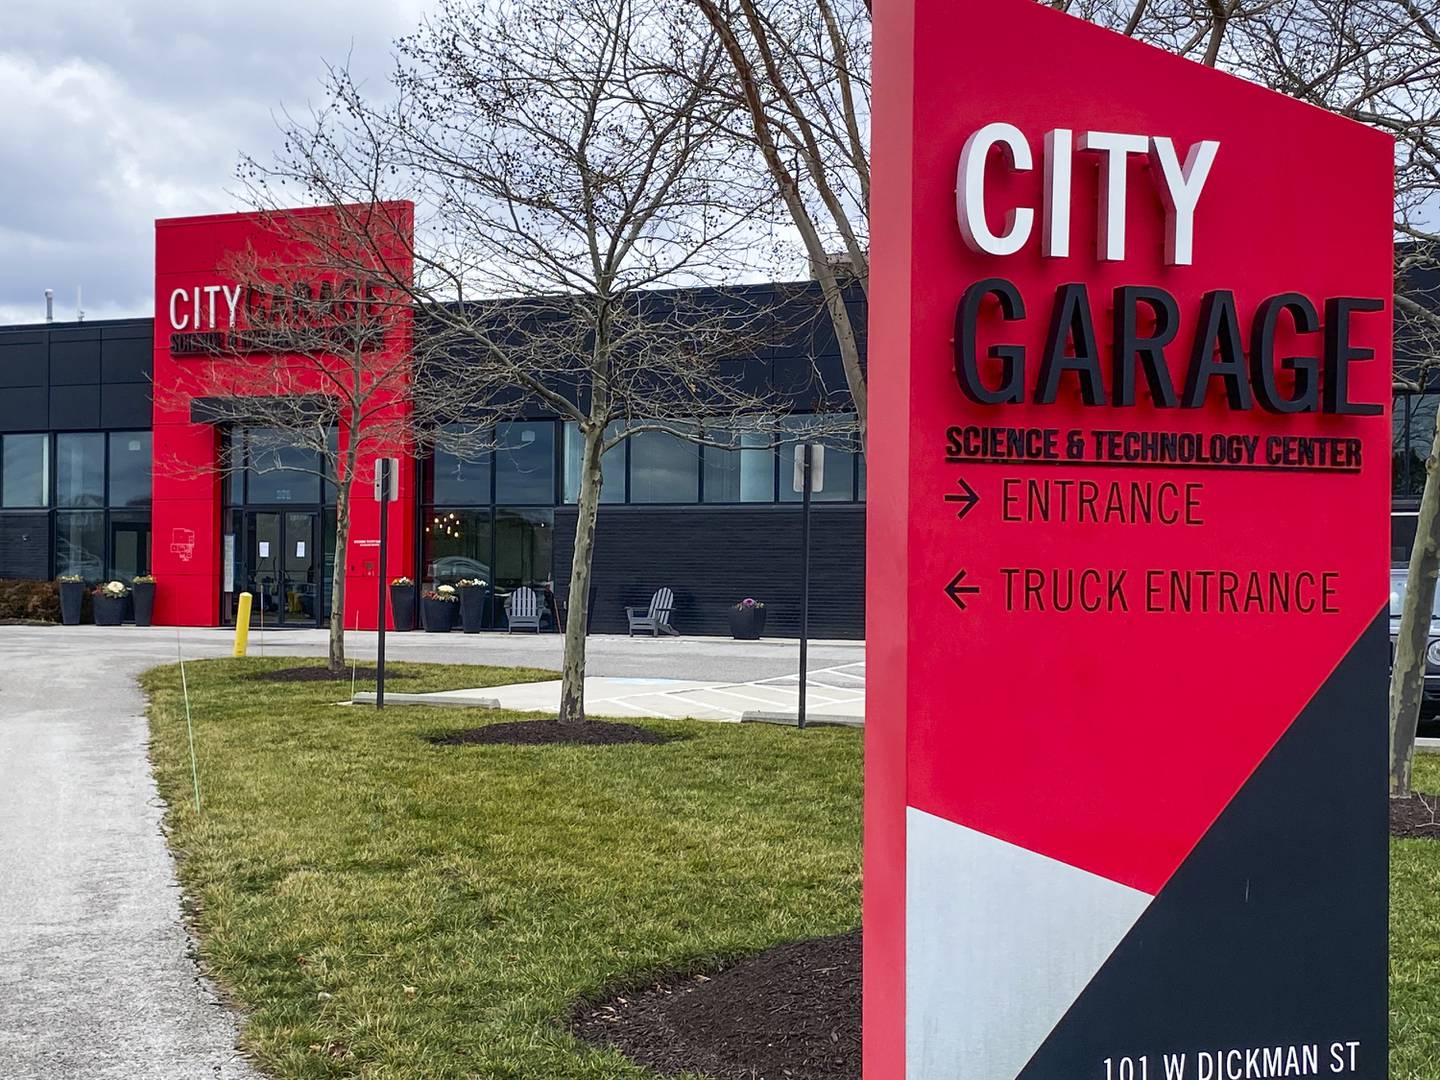 The biotech company Haystack Oncology spun from technology developed at Johns Hopkins University has signed a long-term lease in City Garage, part of the Baltimore Peninsula development in South Baltimore.